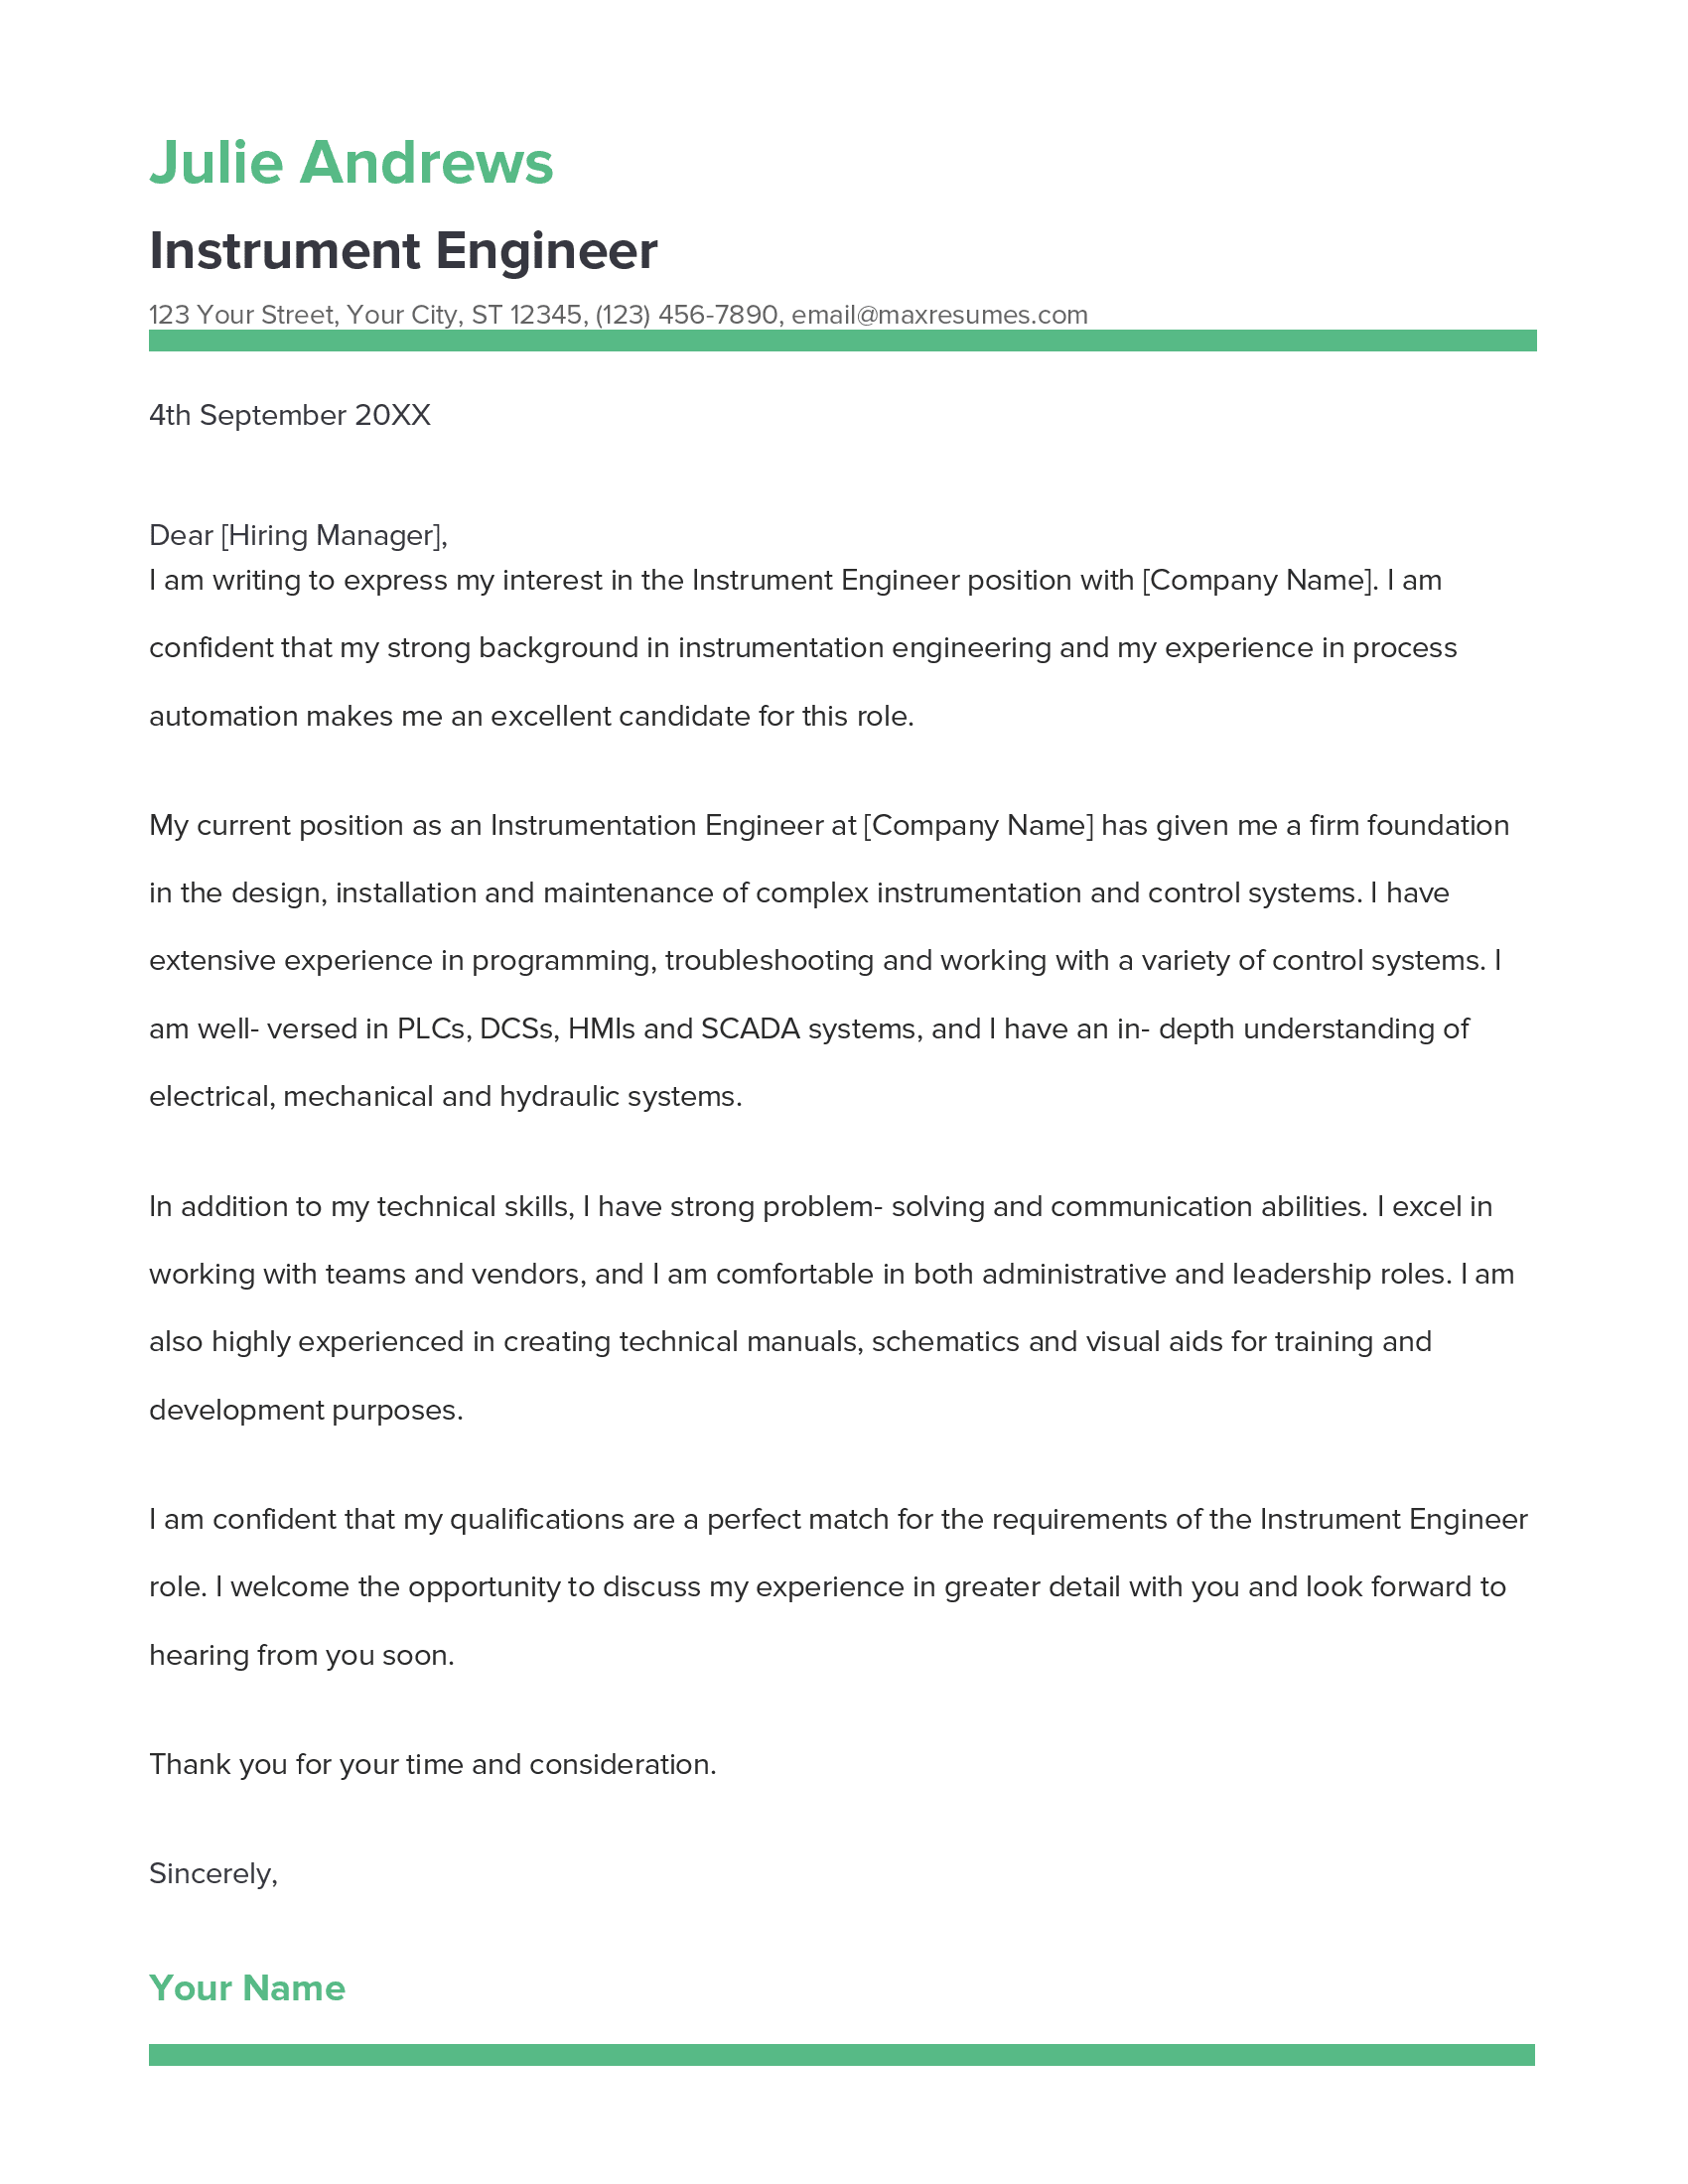 Instrument Engineer Cover Letter Example